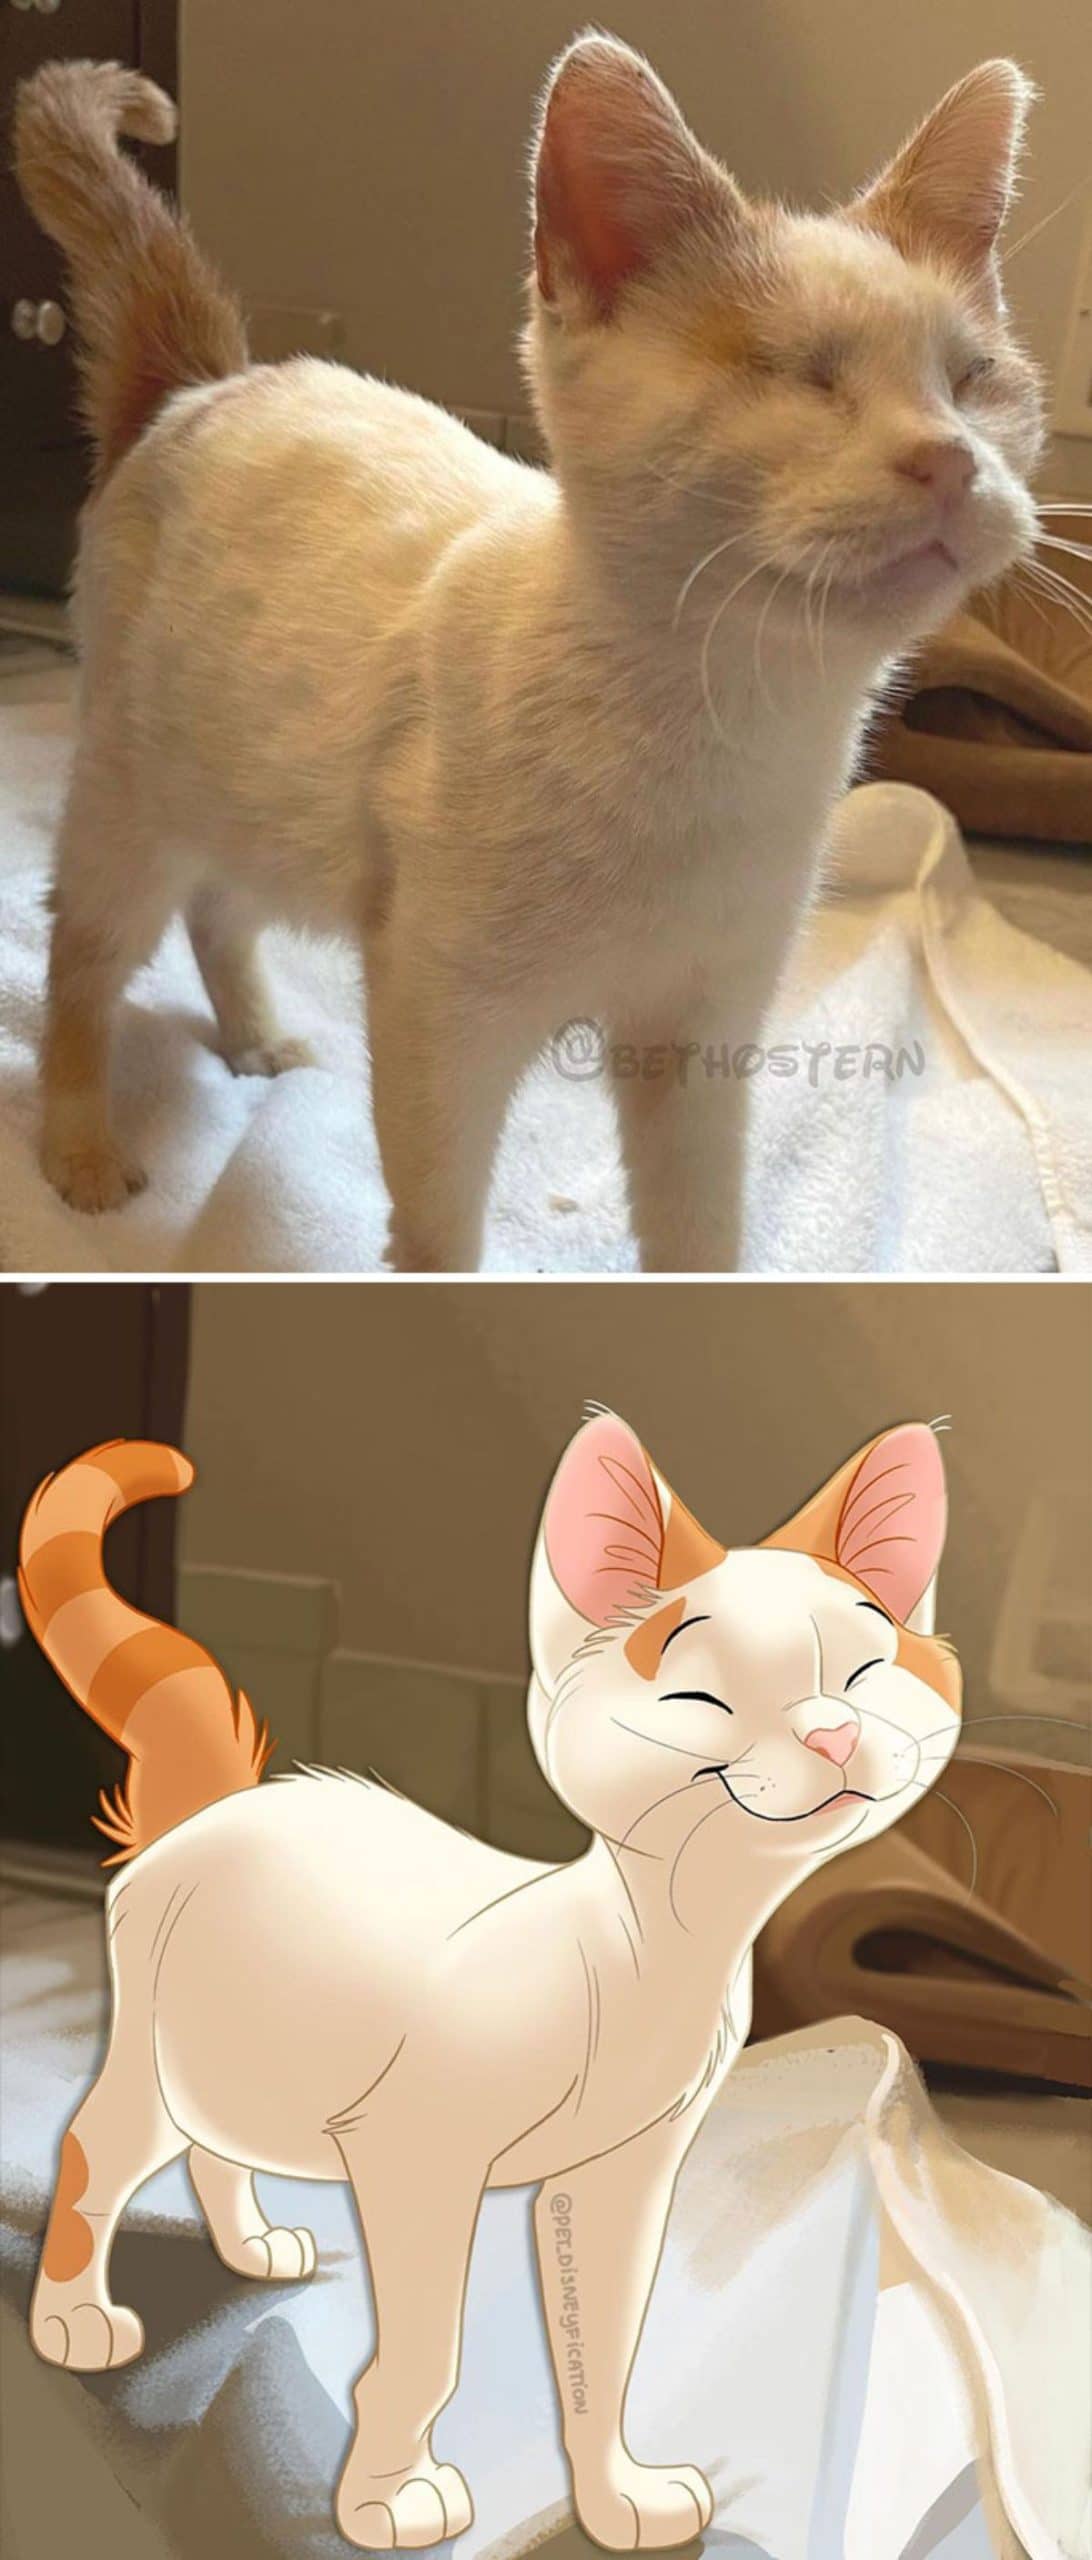 real photo and cartoon image of a blind white and orange cat